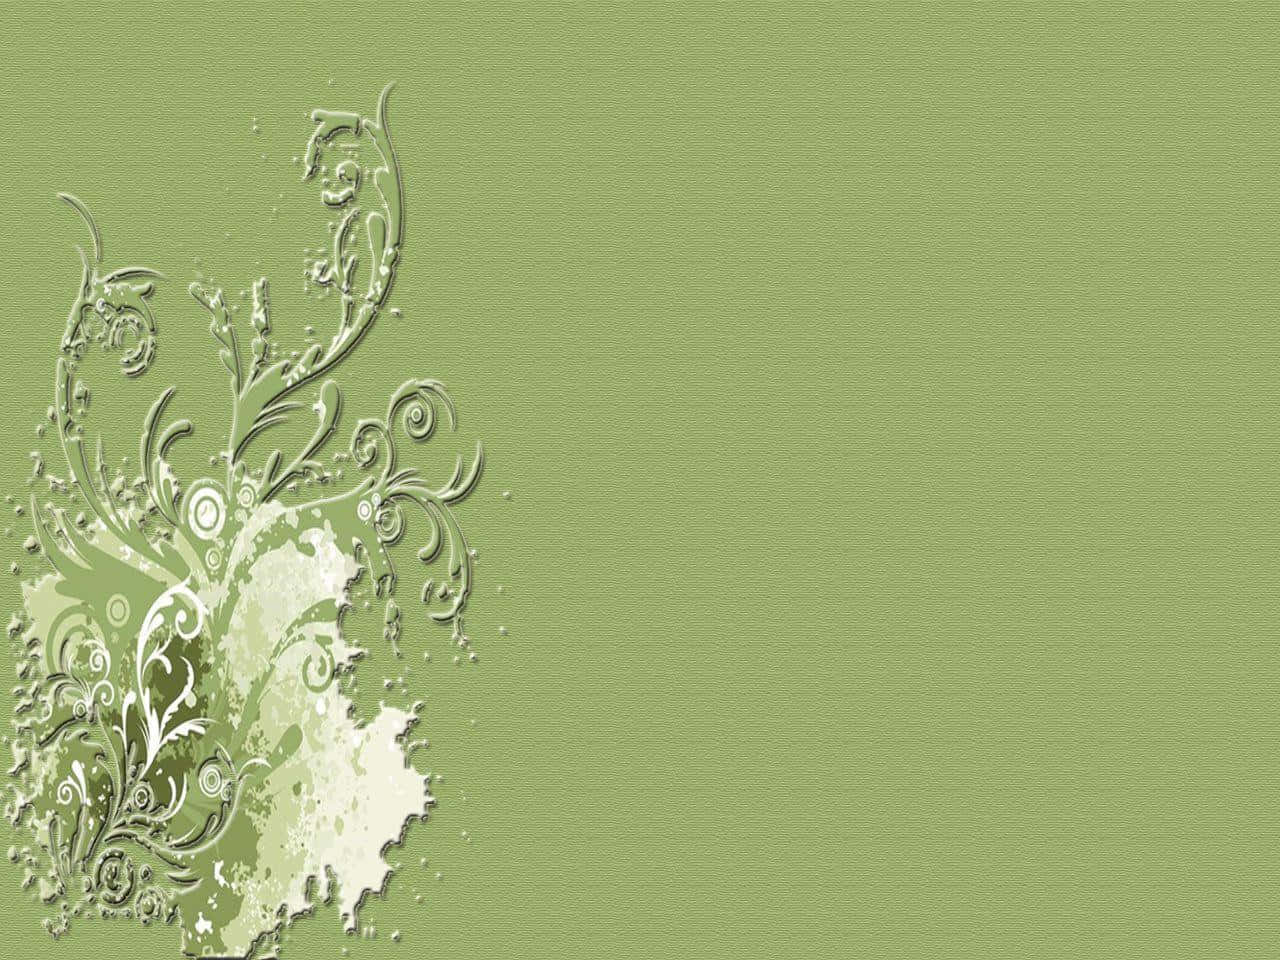 Beautiful Light Sage Green Background for a Wedding Invitation Card